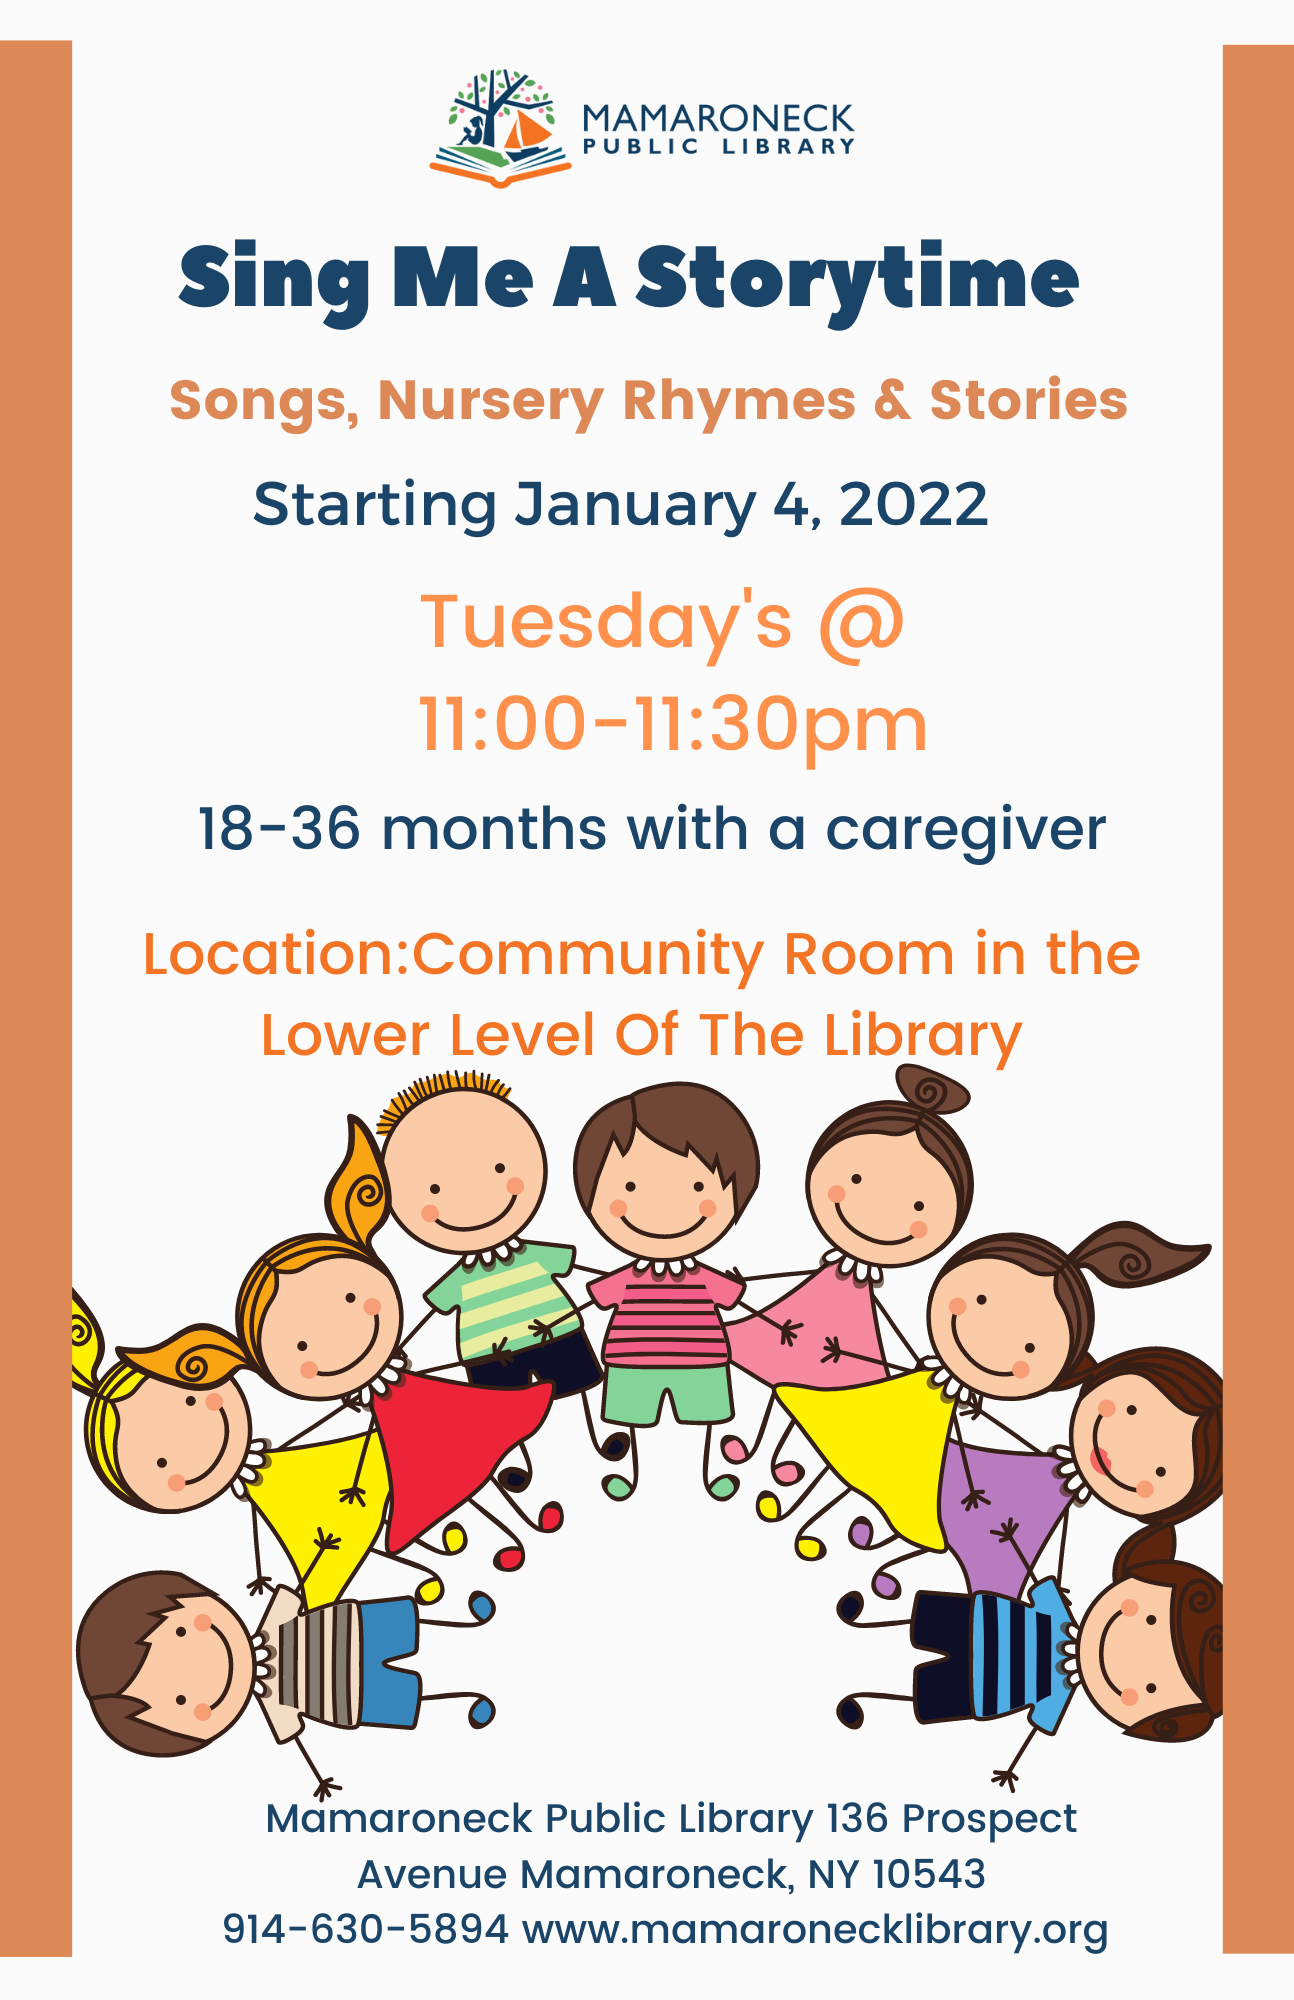 Pre-school program, Sing Me a Storytime - Tuesday's at 11am in the Community Room